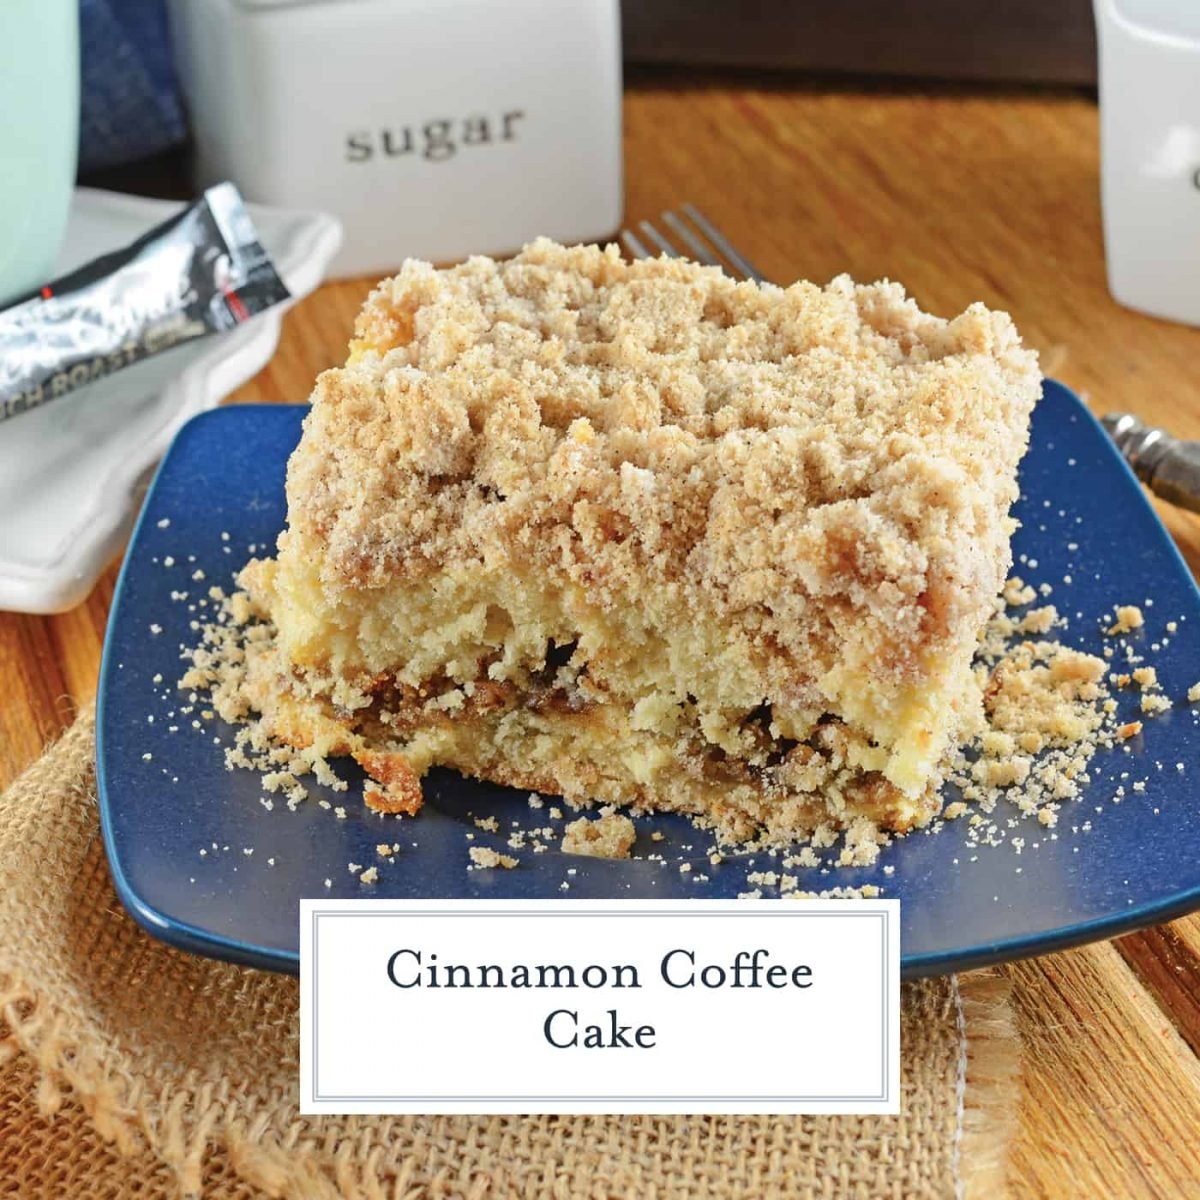 This is a classic Cinnamon Coffee Cake. Cinnamon streusel topping and a ribbon of brown sugar filling make this moist cake perfect for breakfast or brunch. #cinnamoncoffeecake #bestcoffeecake www.savoryexperiments.com